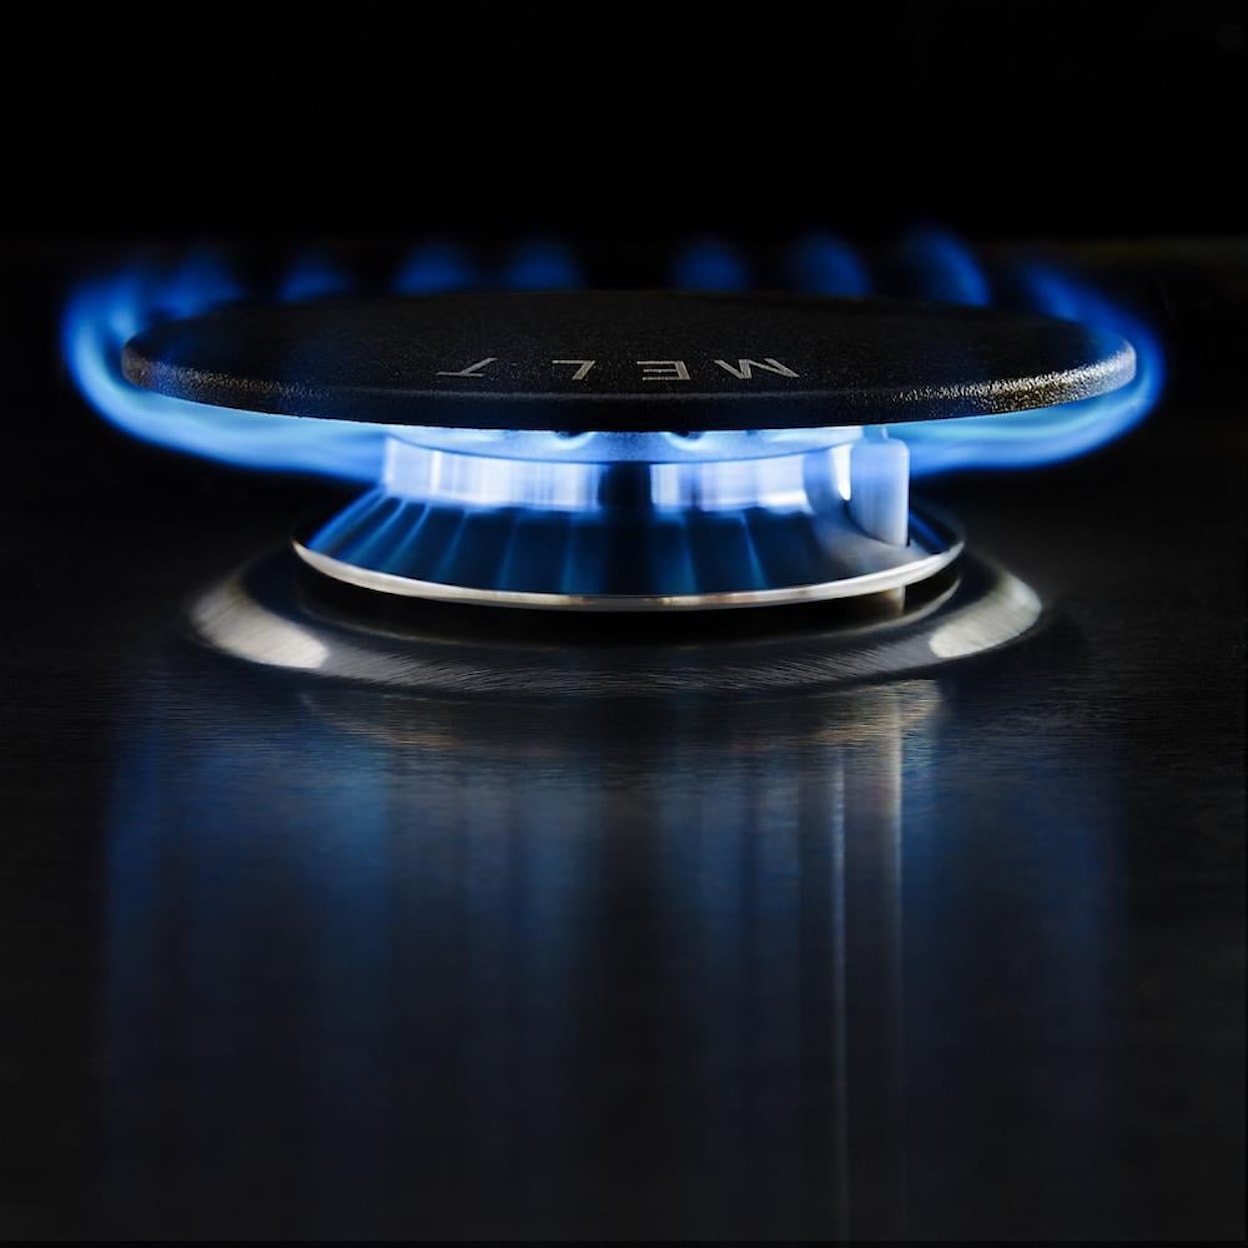 Maytag Gas Ranges Cooktops (gas)